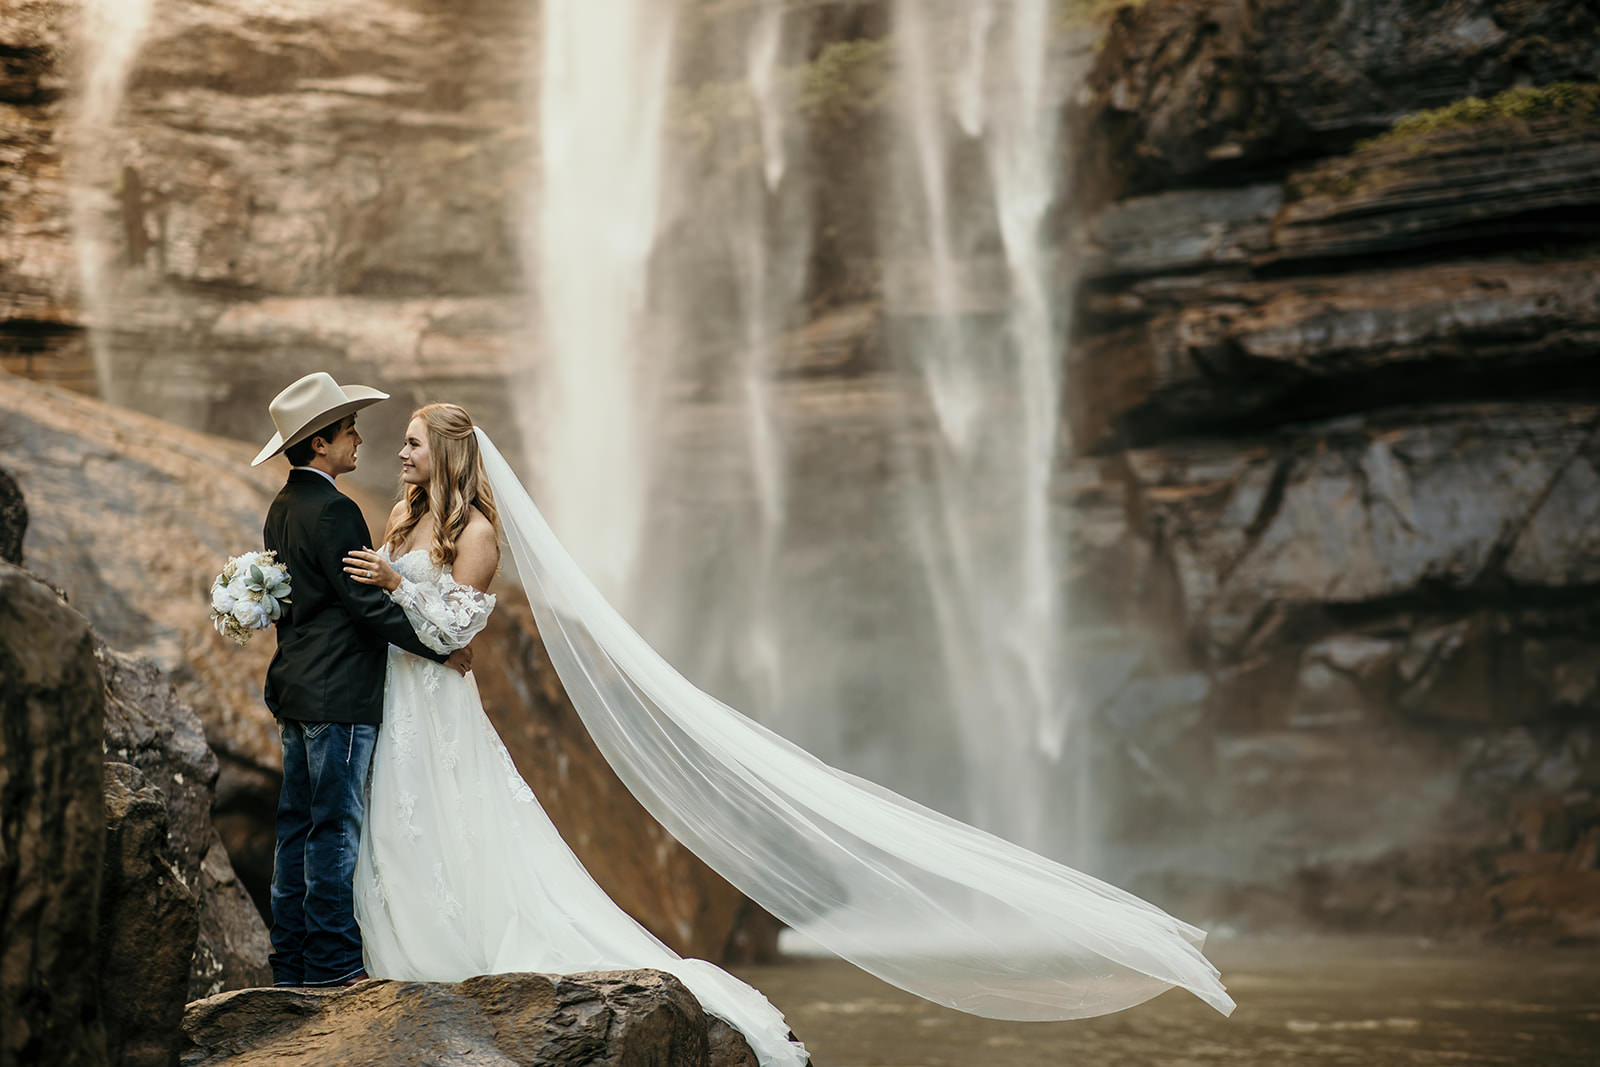 Waterfall Weddings at scenic Toccoa Falls College